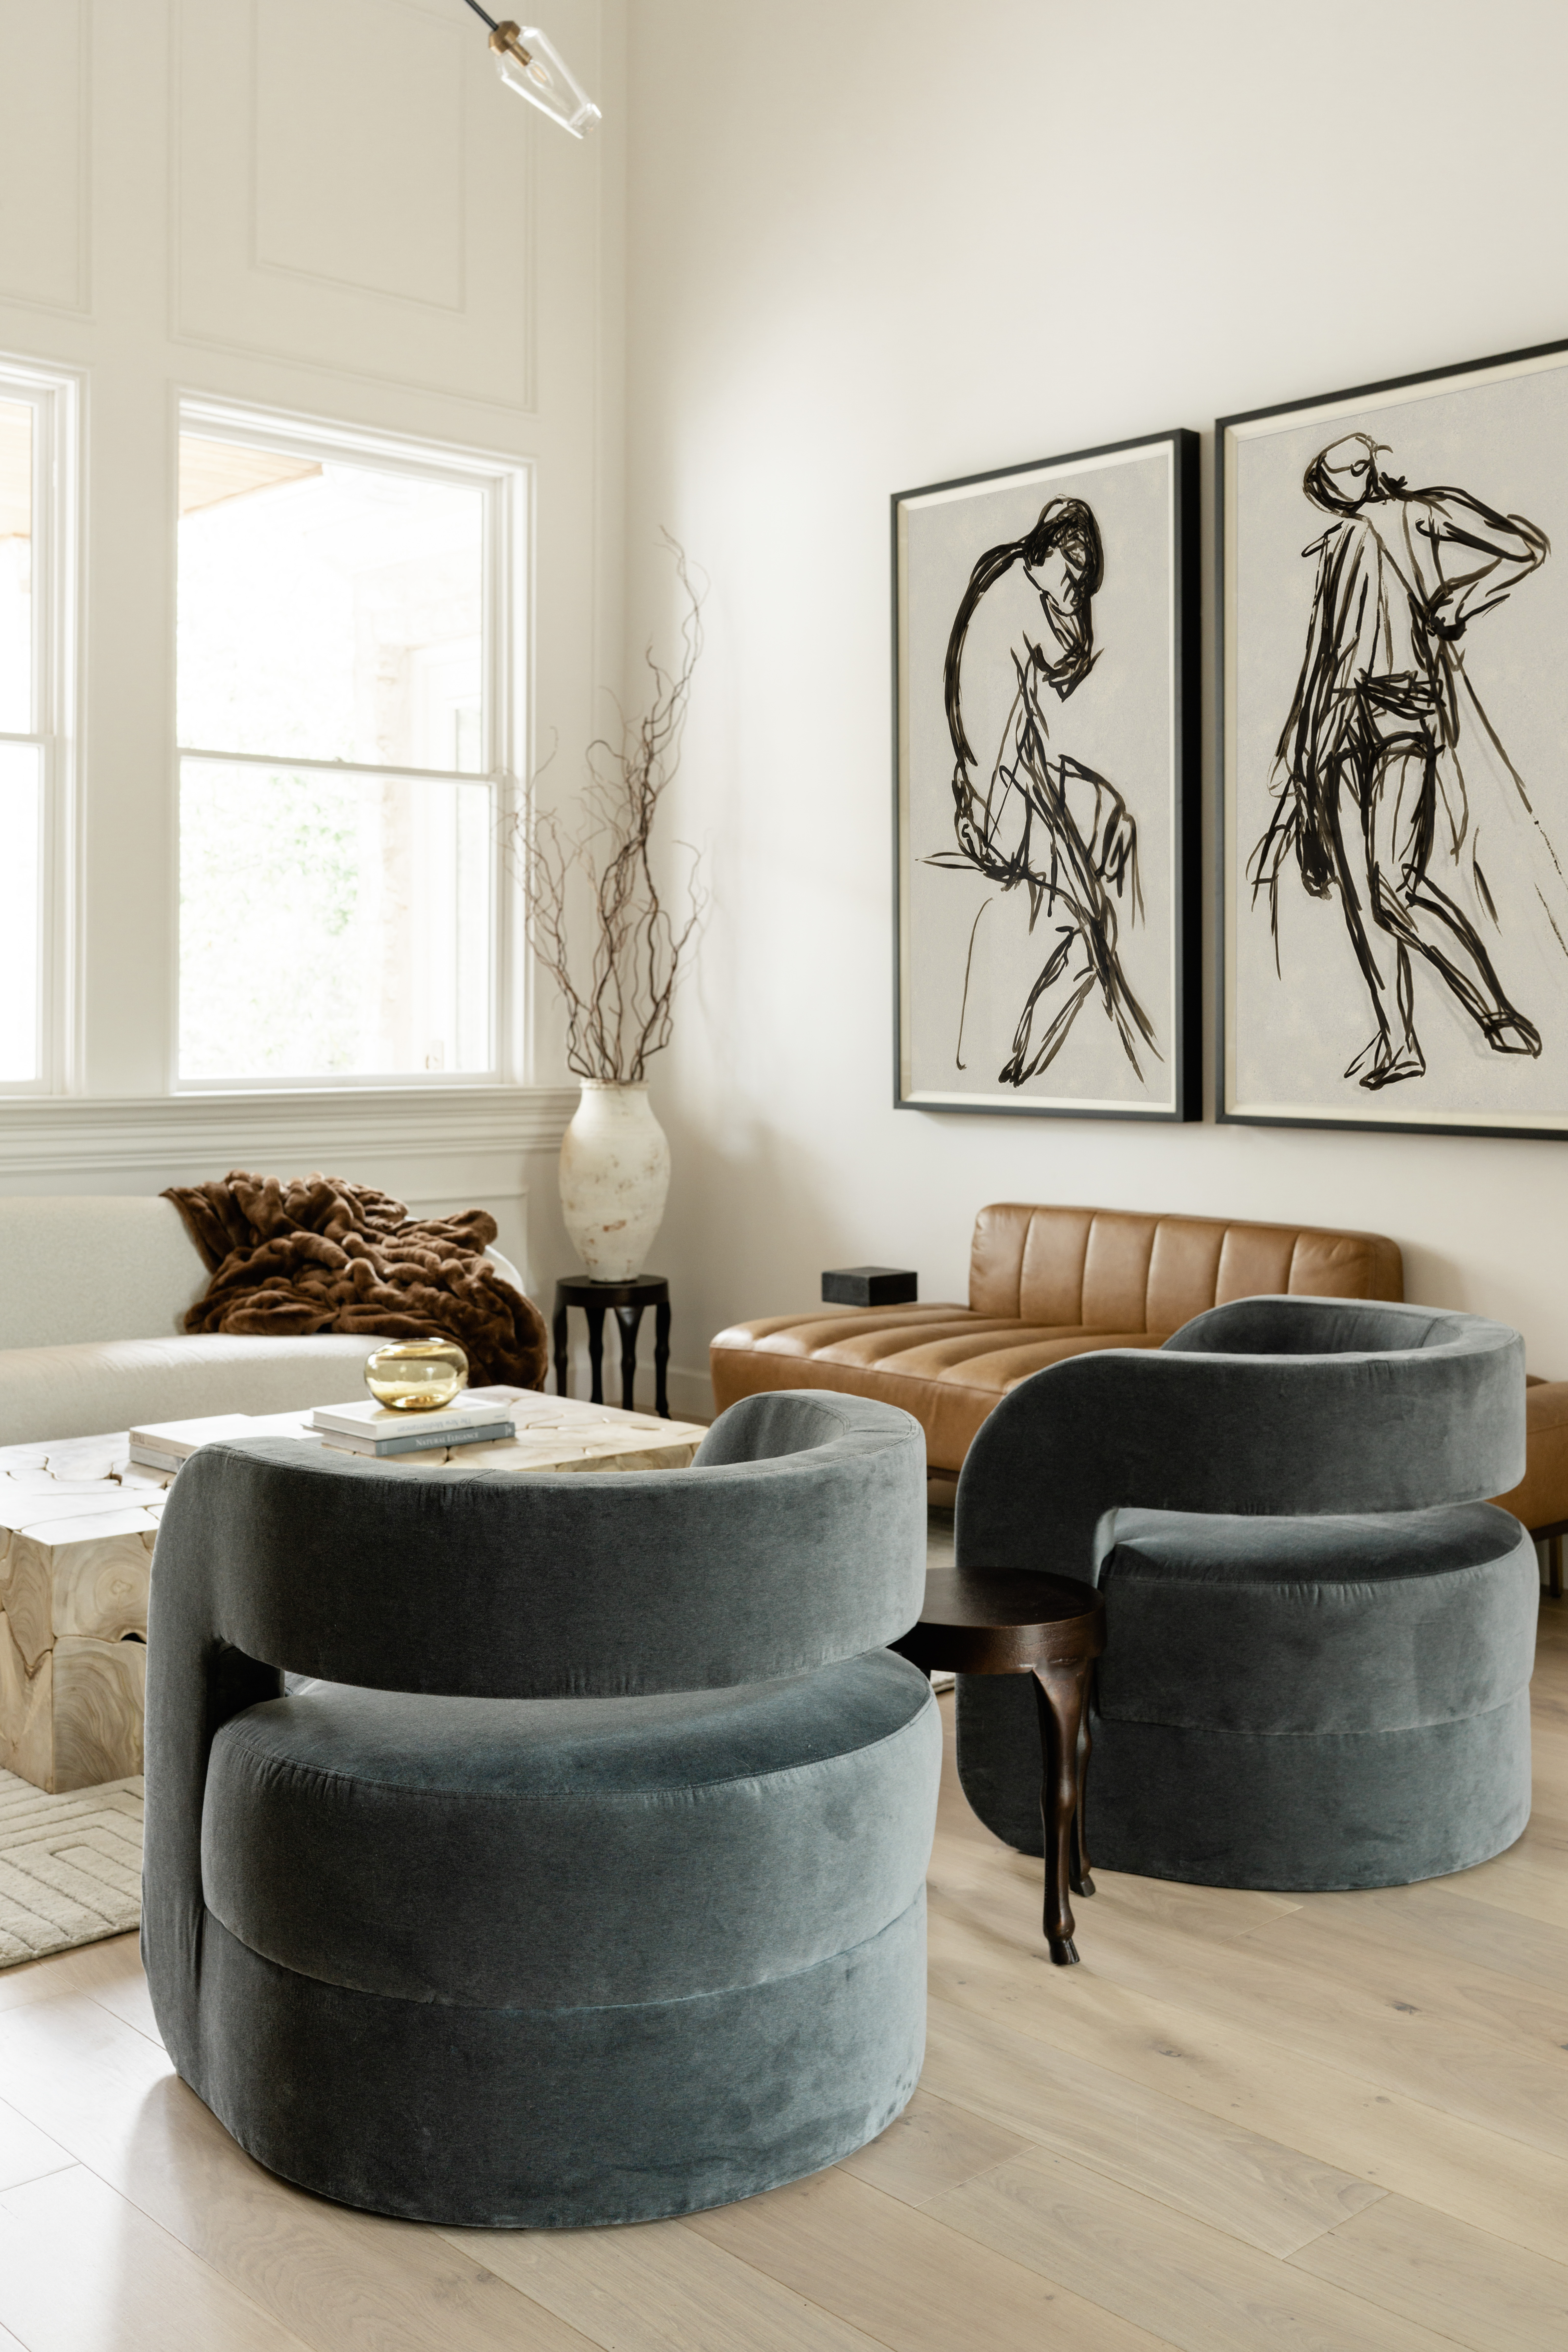 Velvet Chair Seating with Statement Art Pieces